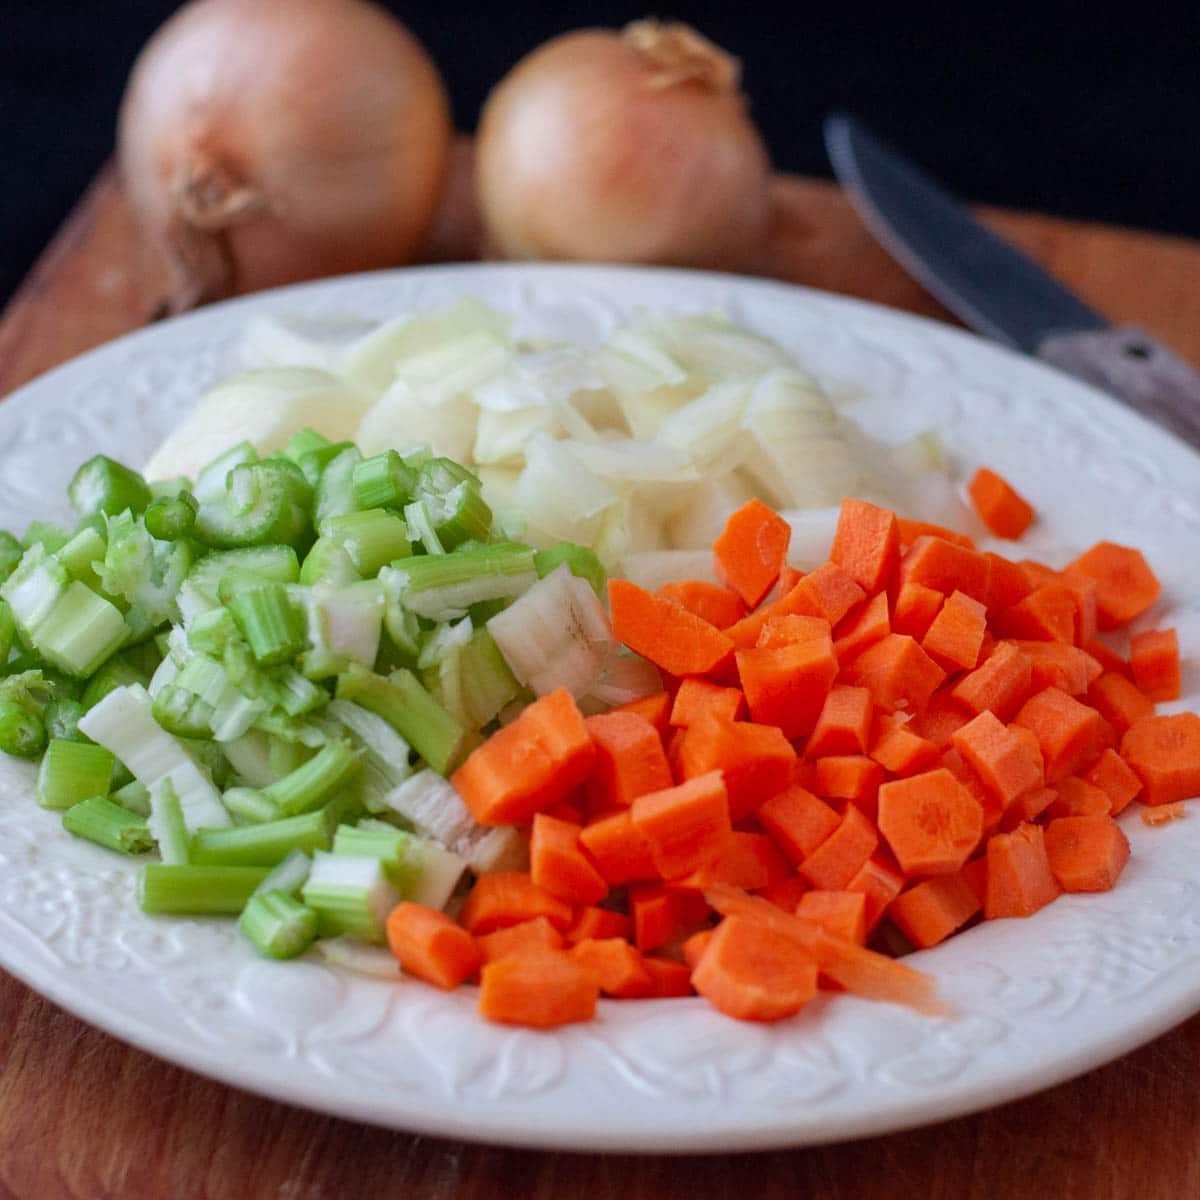 carrot onion celery called mirepoix soffritto